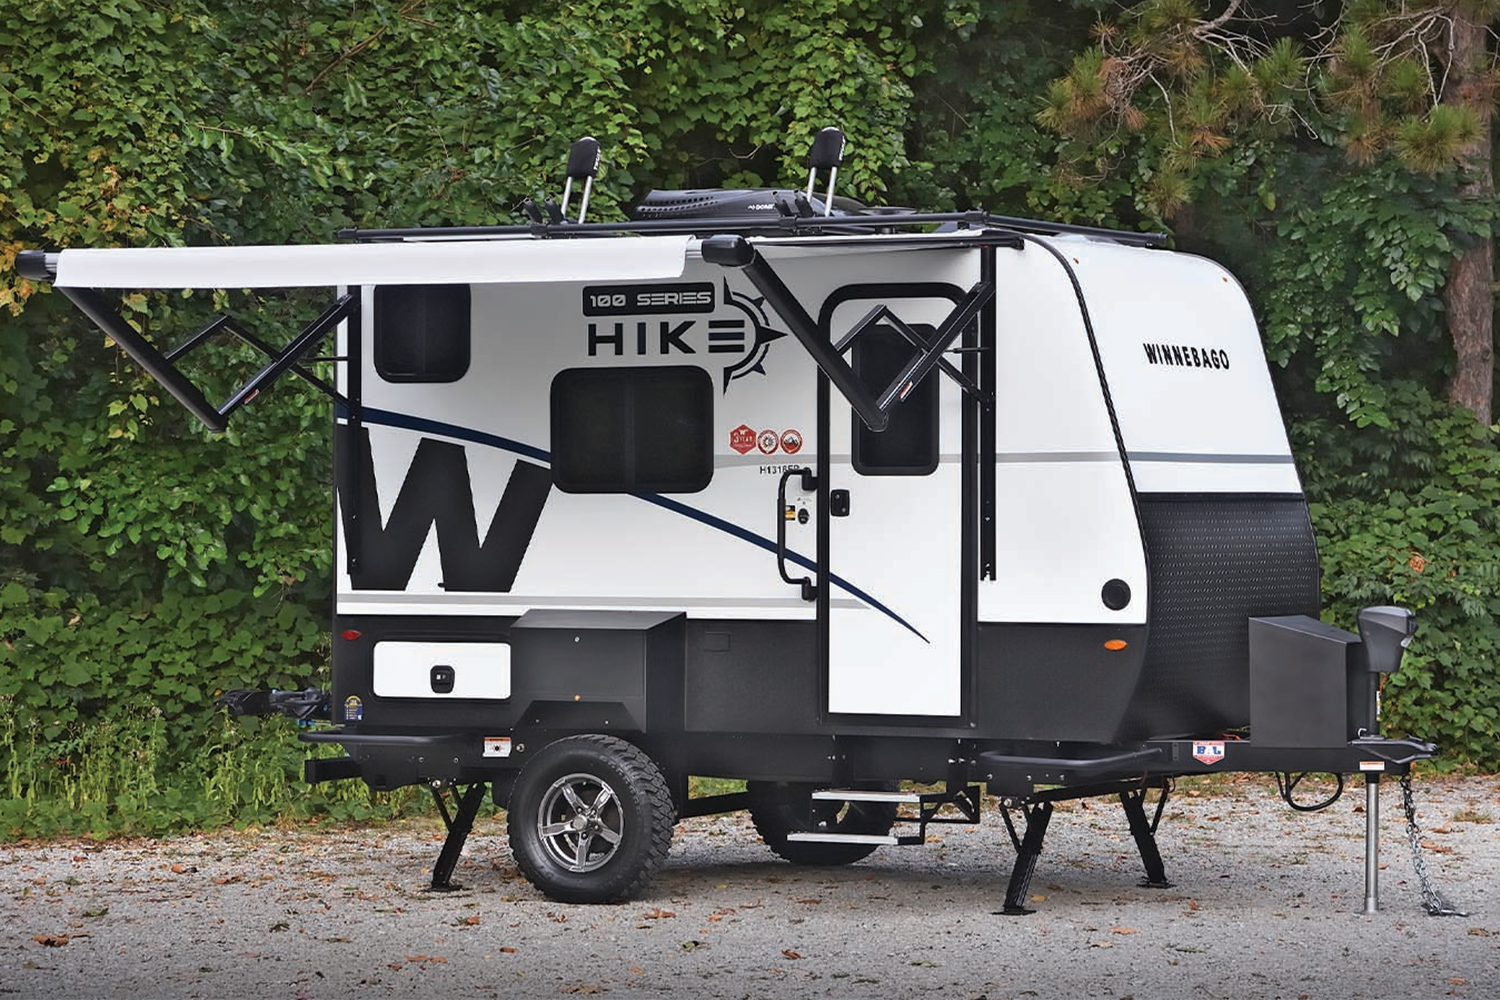 The new Hike 100 travel trailer from Winnebago sitting on a gravel plot in the woods